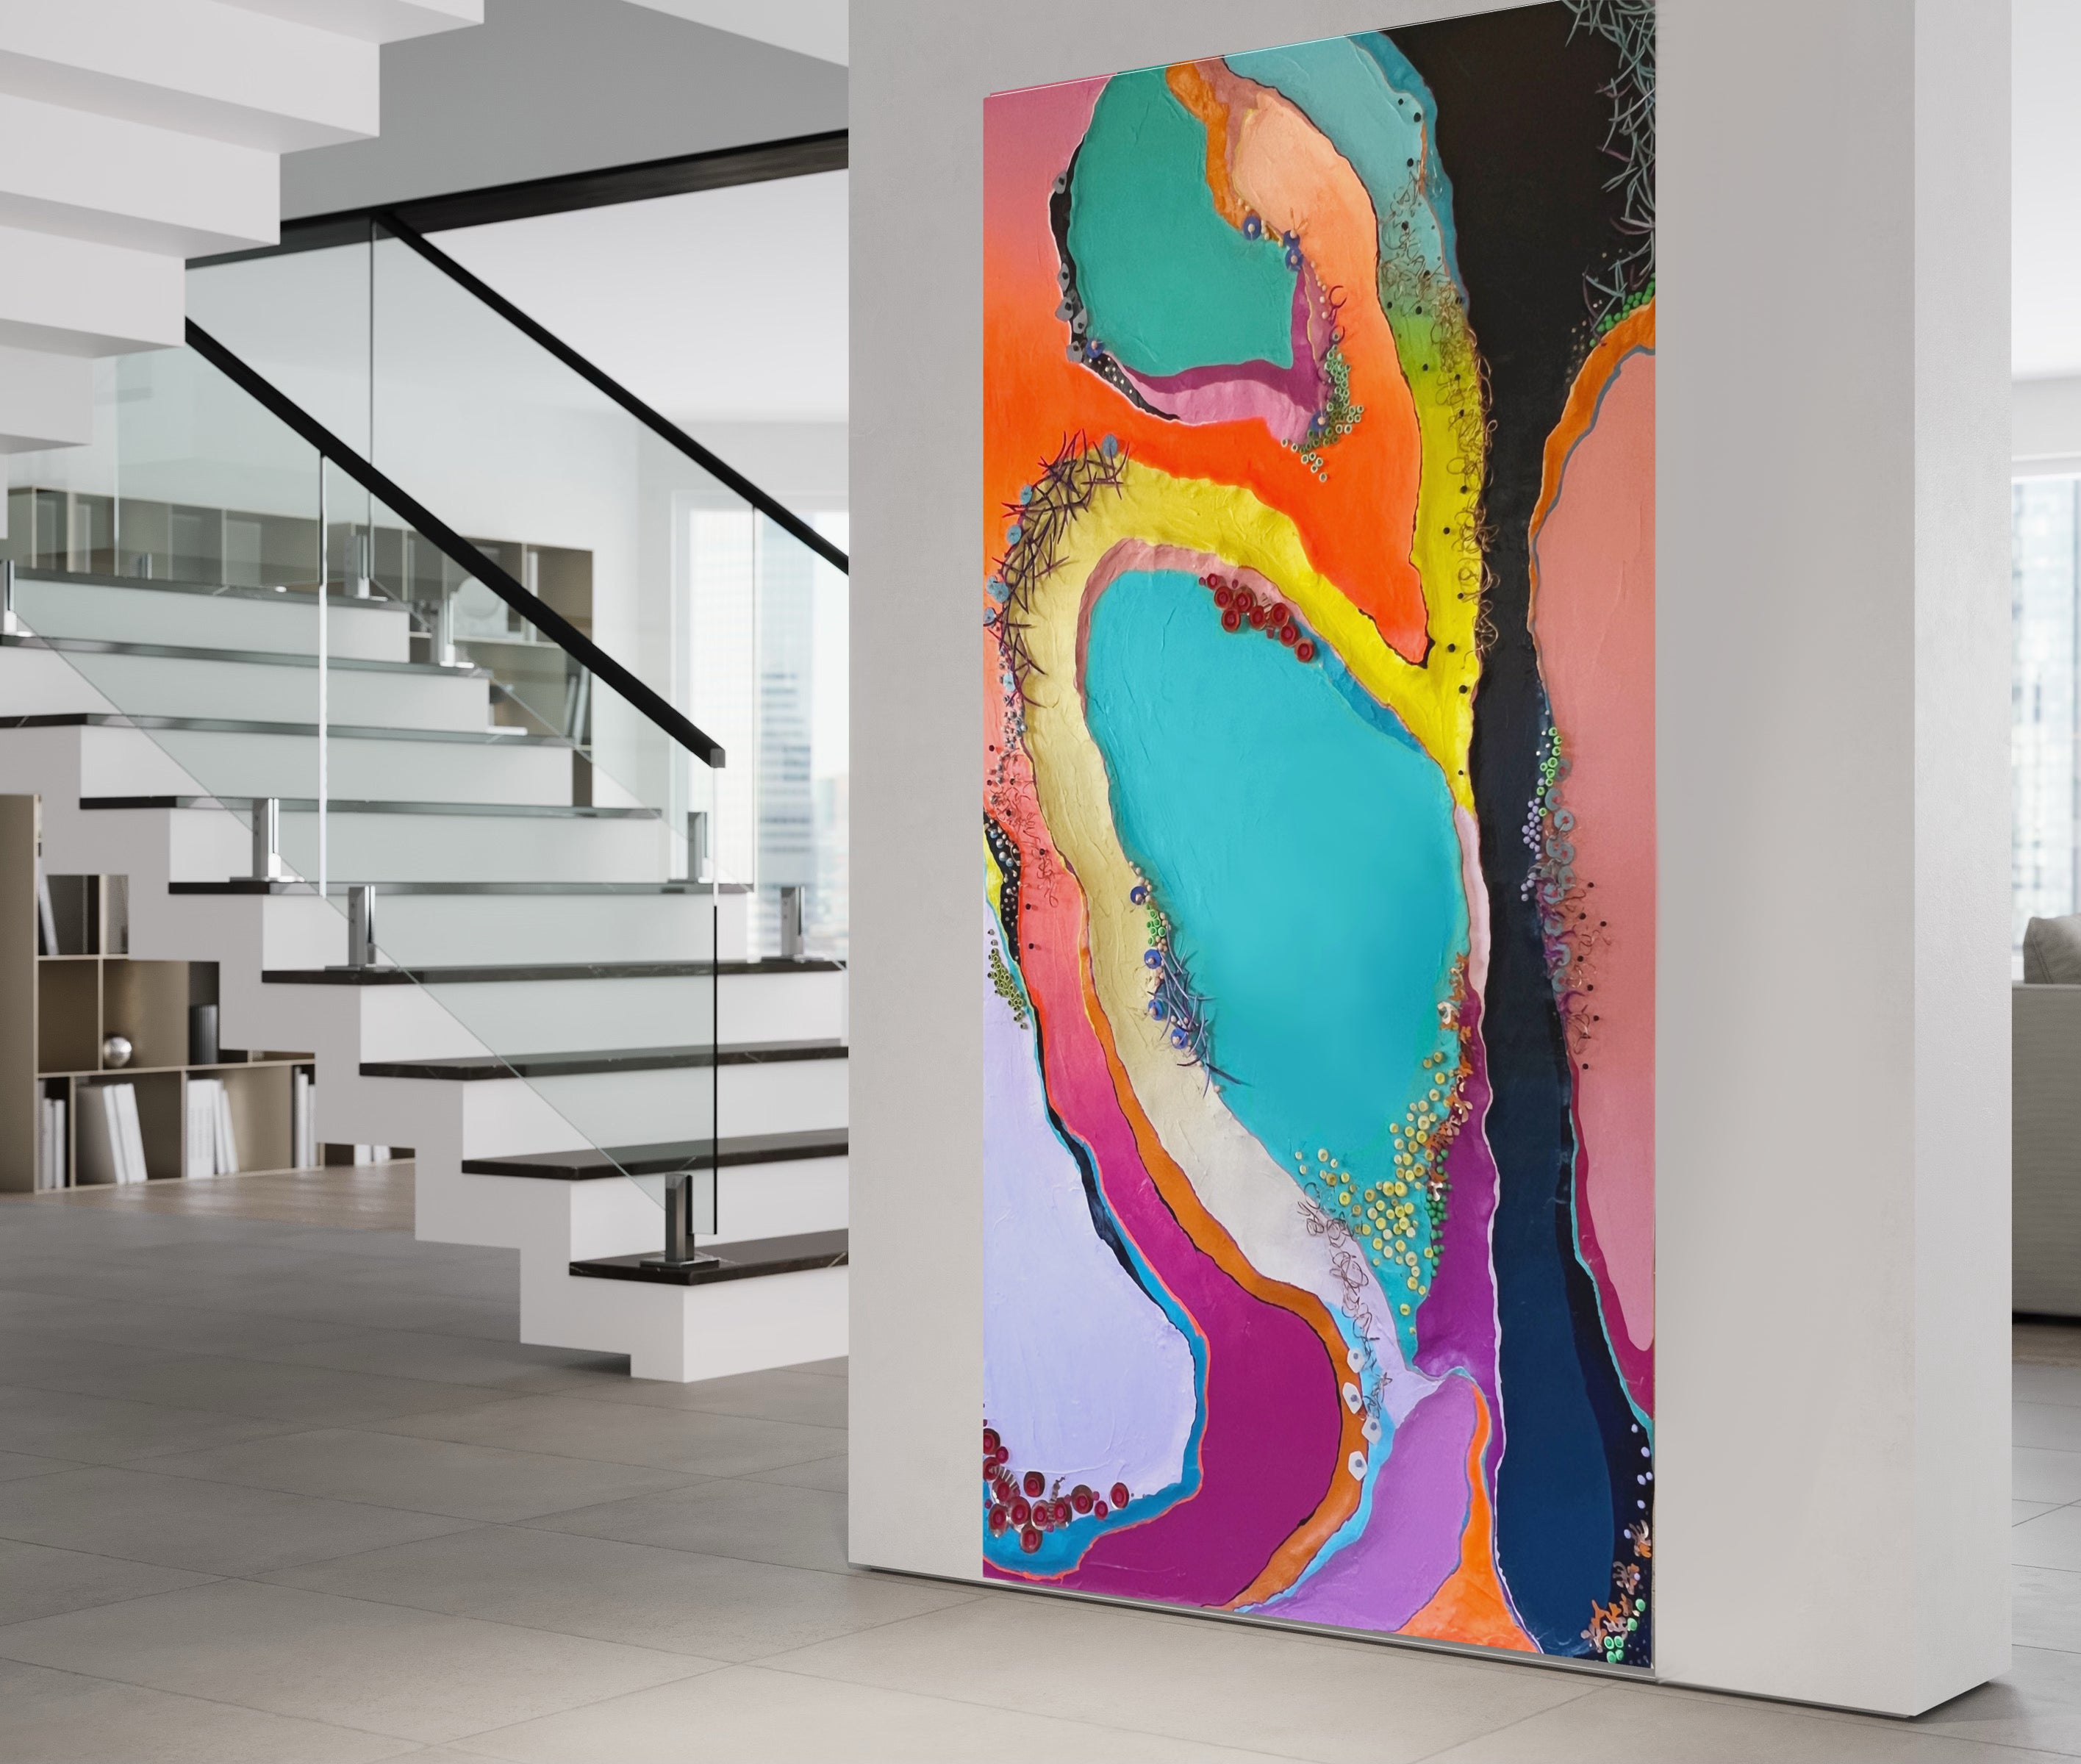 Large colorful abstract sculptural mural on an office wall that is 12x8 feet in size with stairs in the background